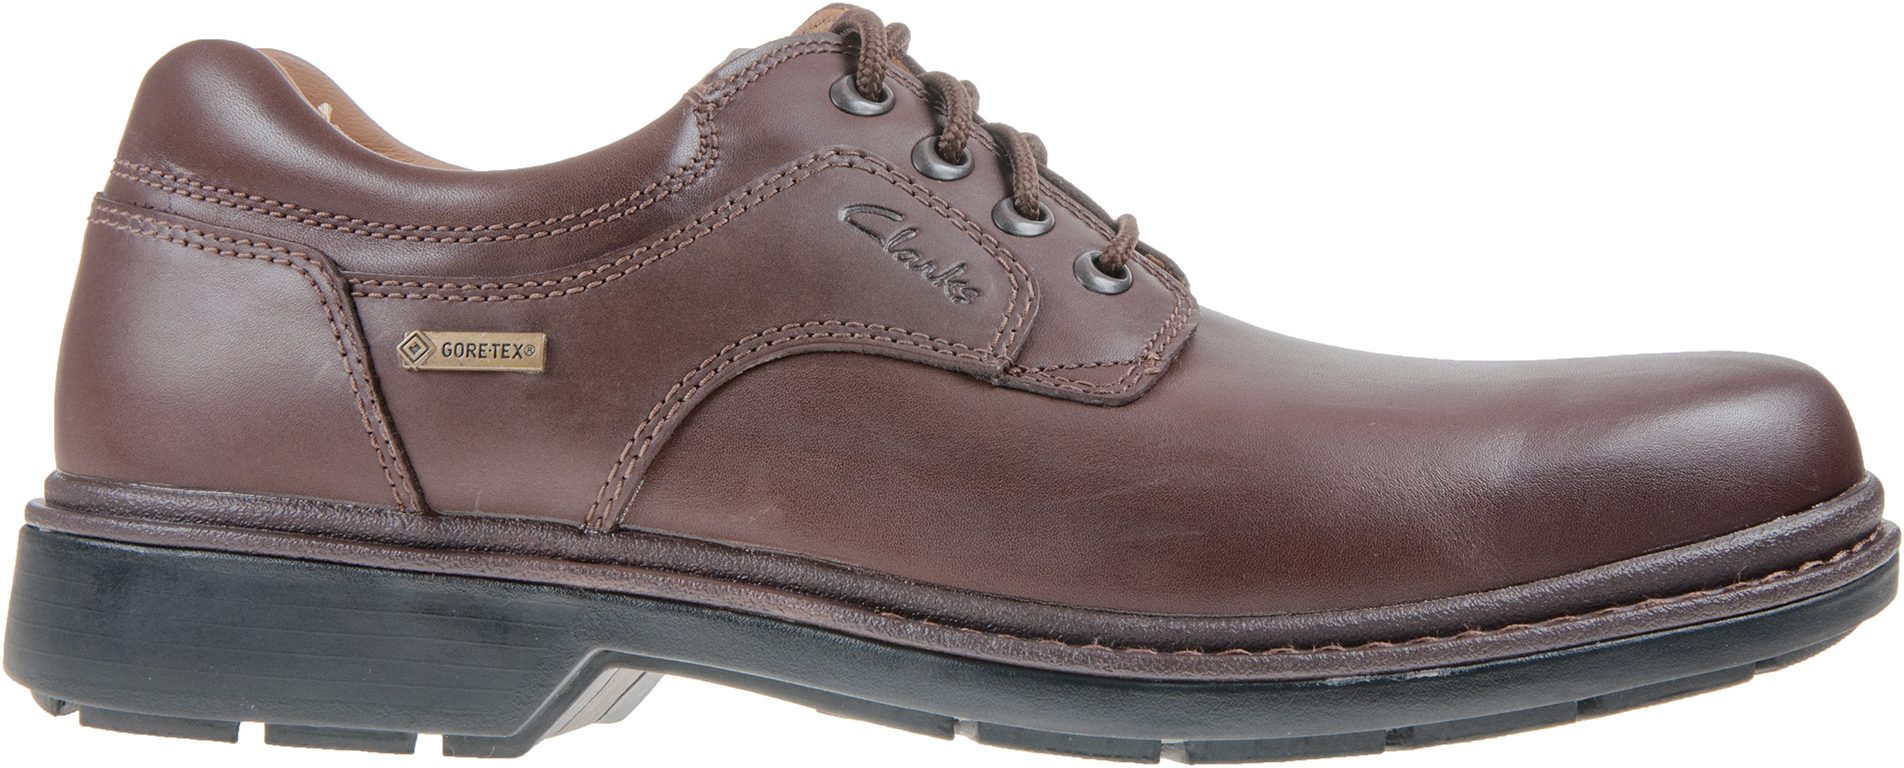 Clarks Rockie Lo Gore-Tex Ebony 20318606 - Casual Shoes - Humphries Shoes